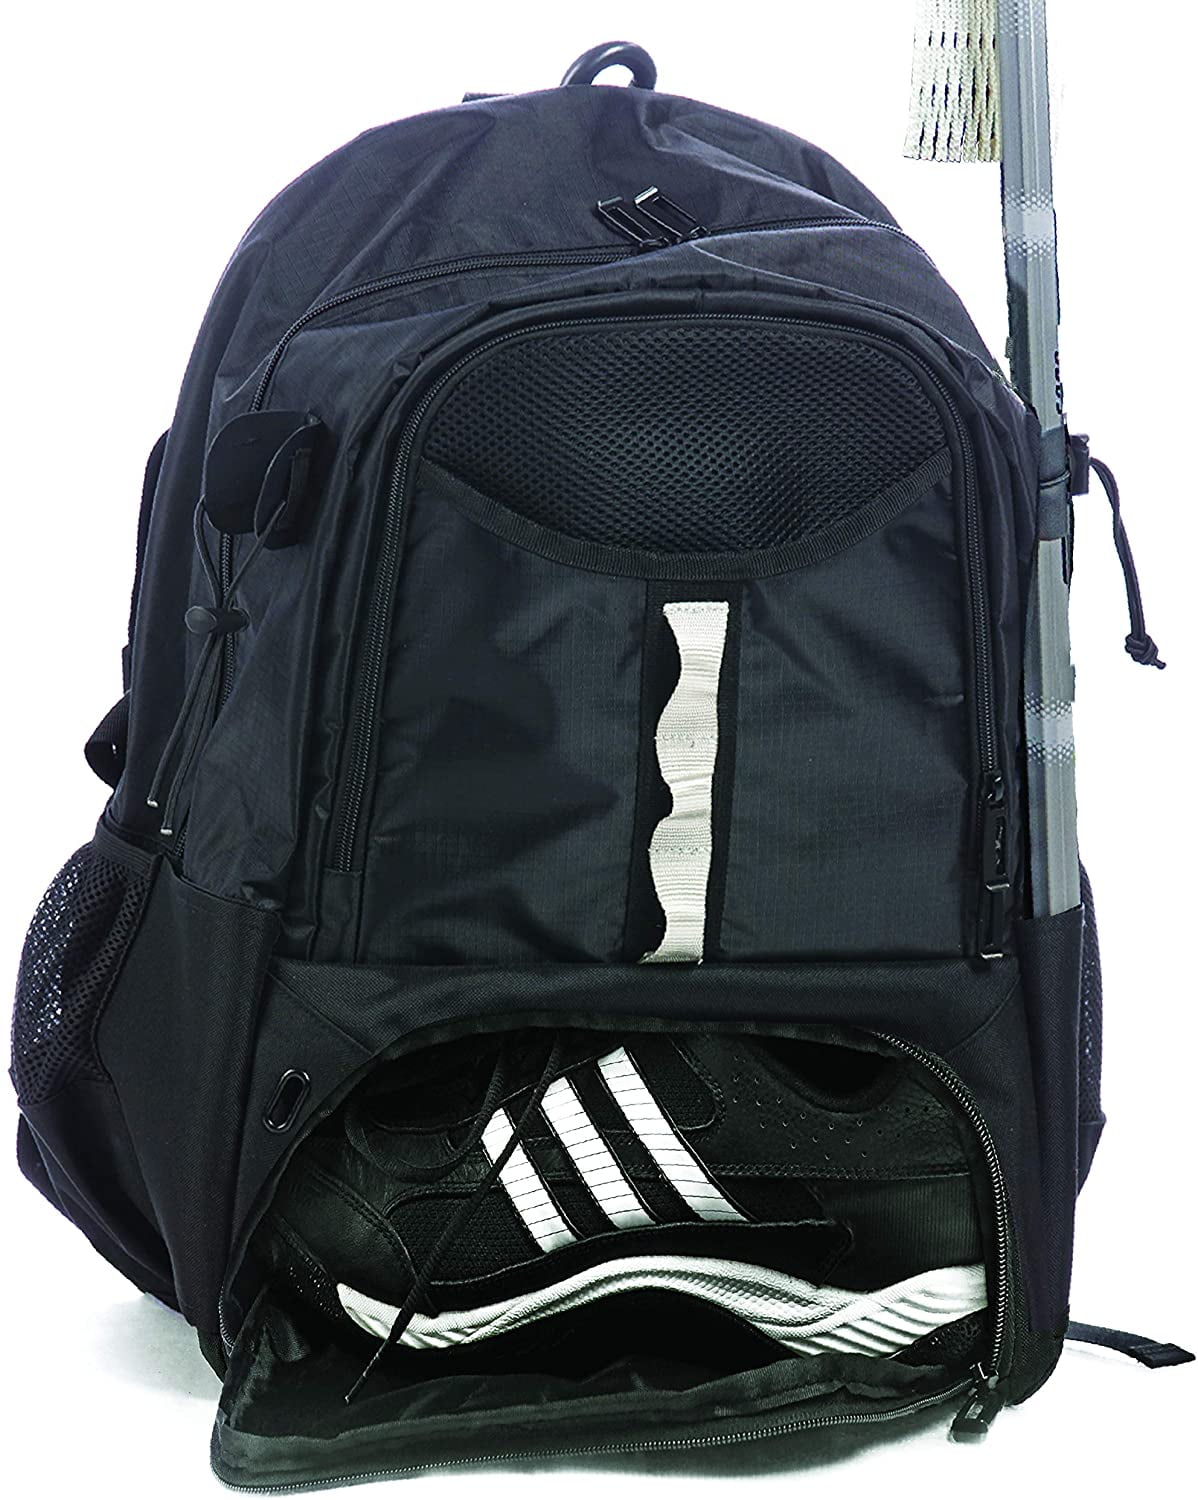 Lax Equipment Bags for Boys or Girls Kids & Youth Athletico Lacrosse Stick Bag